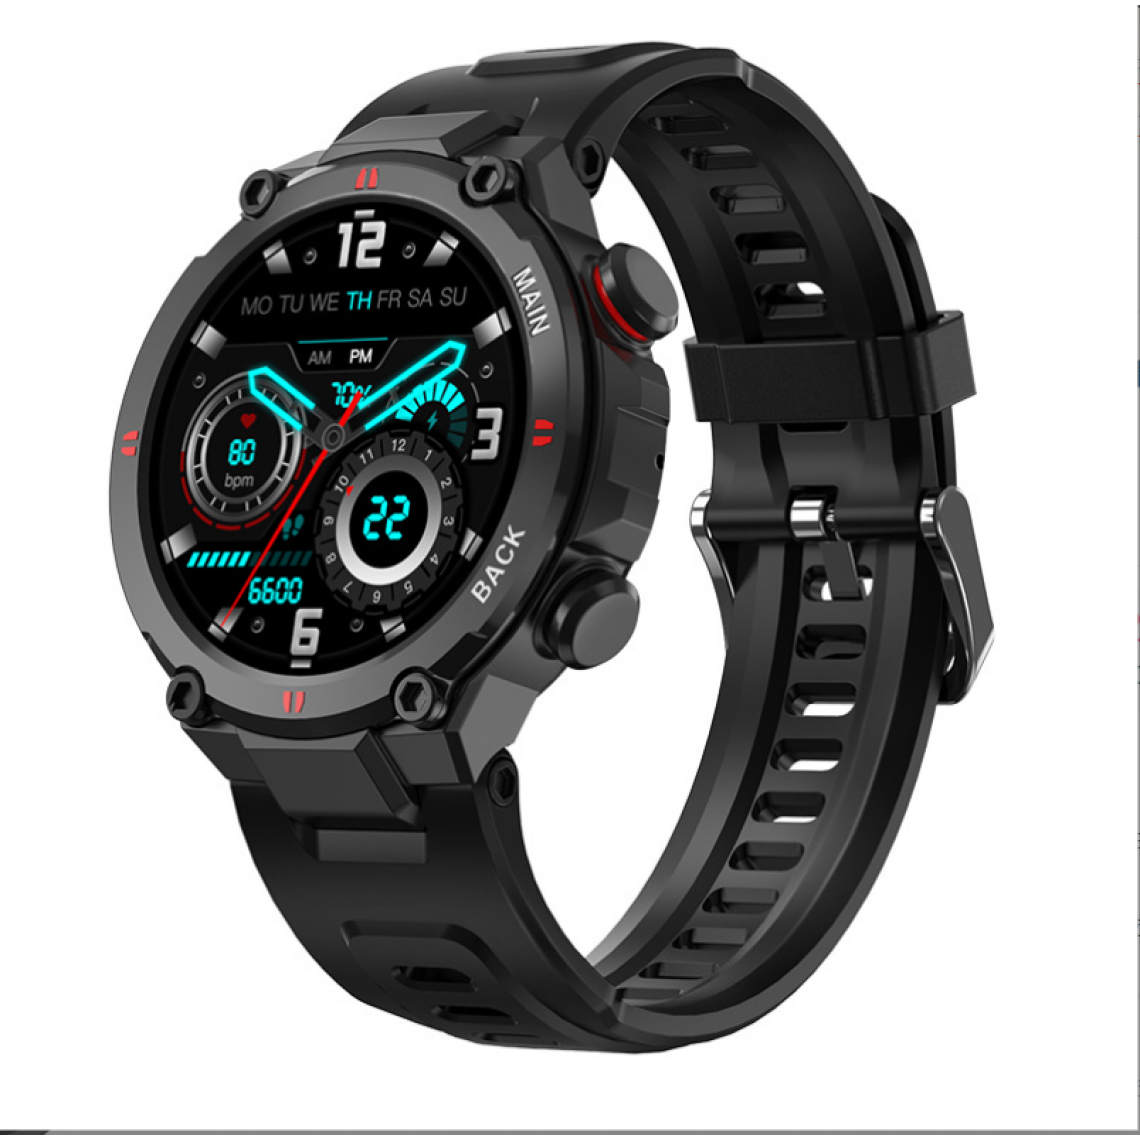 Chronotech Montres - Chronus Smart Watch Bluetooth Call Watches Pedometer music play incoming call message reminder Smart Watch ï¼blackï¼ - Montre connectée